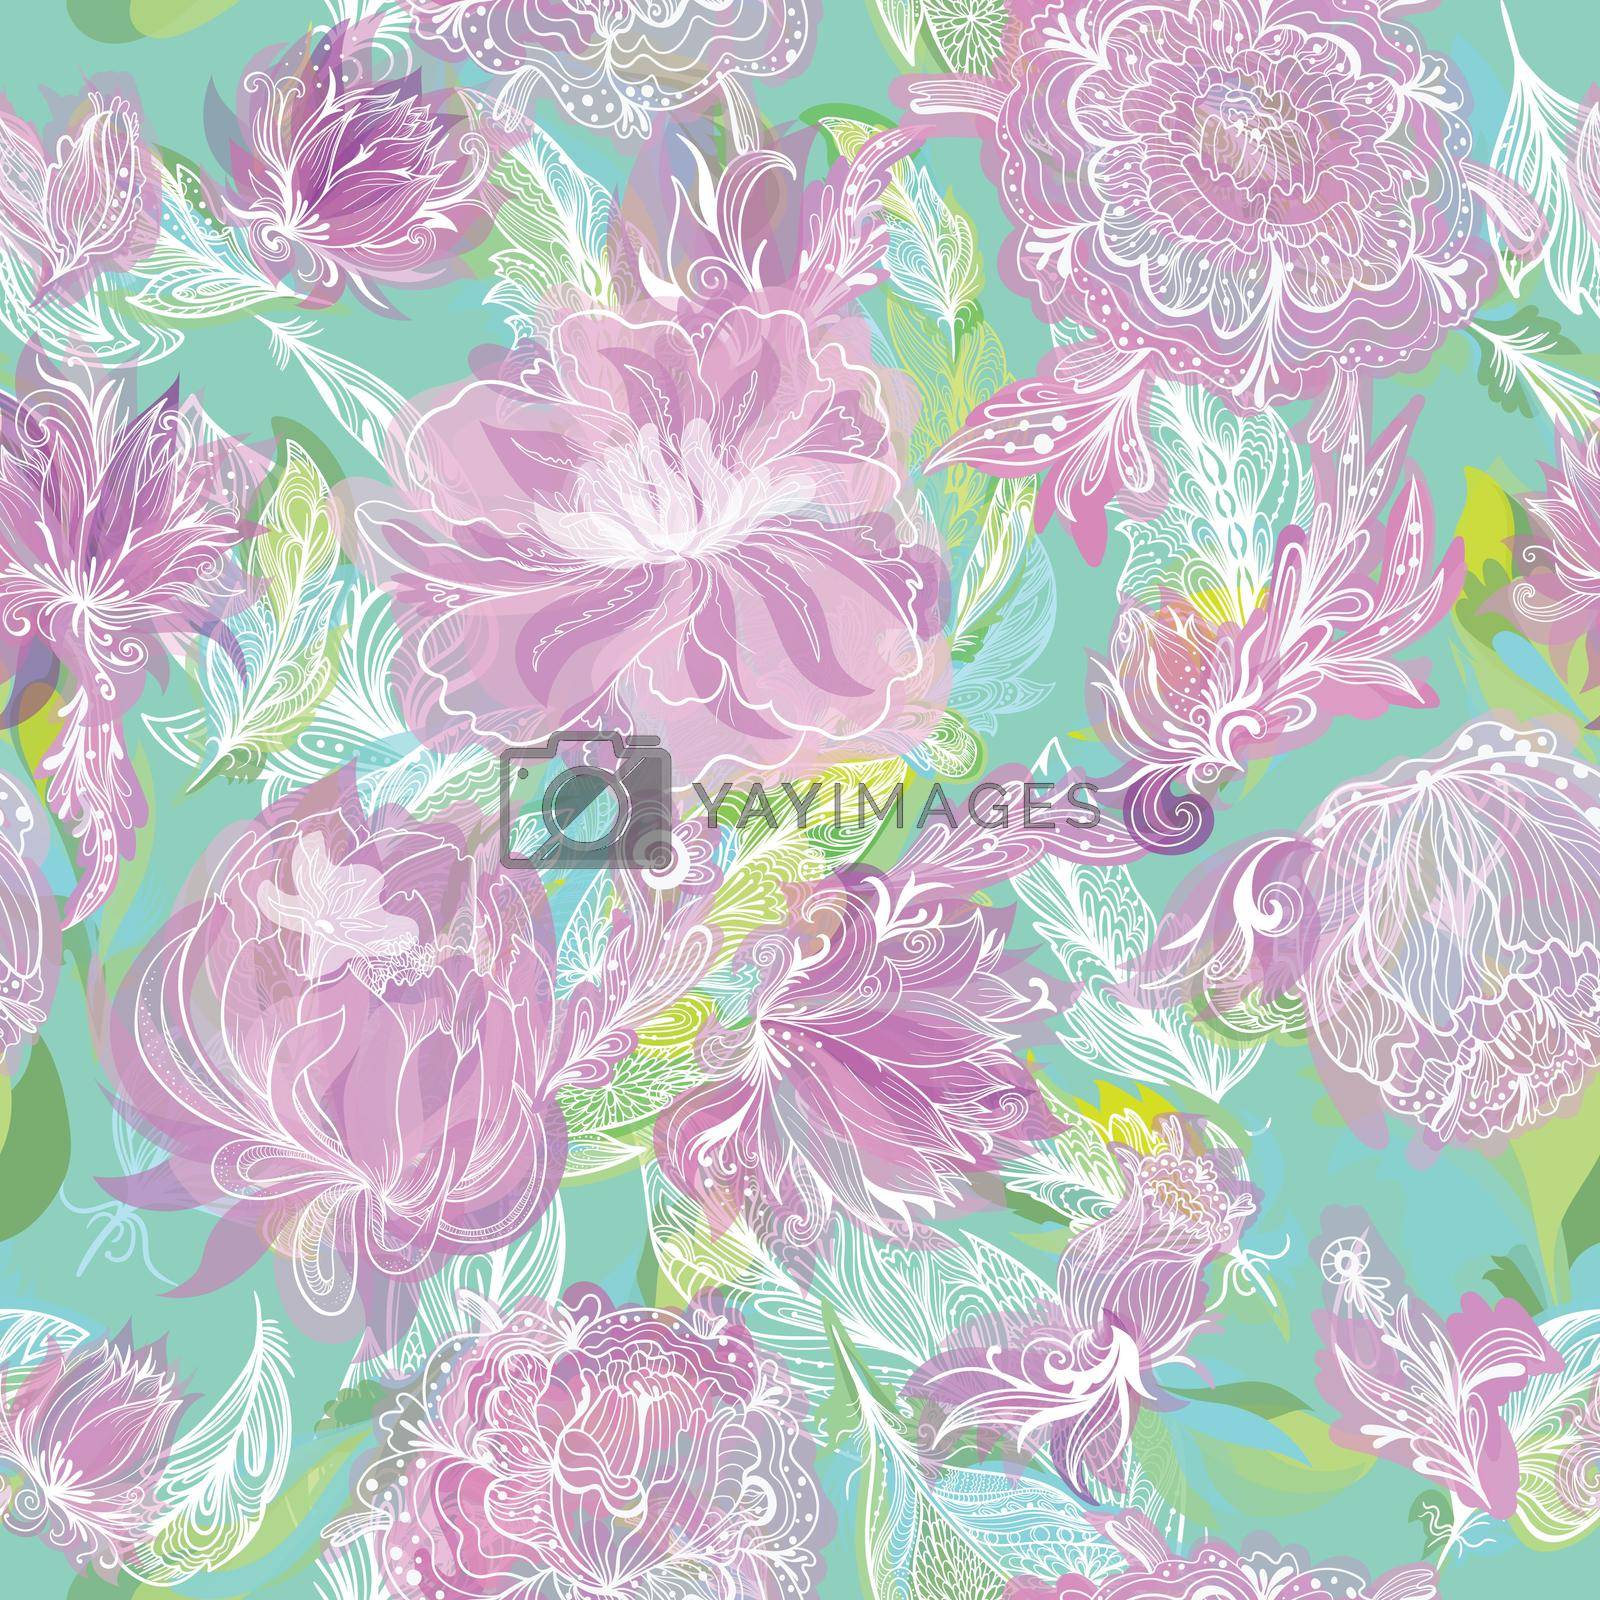 Sketch style magic pattern with peony, lily and lotus flowers on mint background